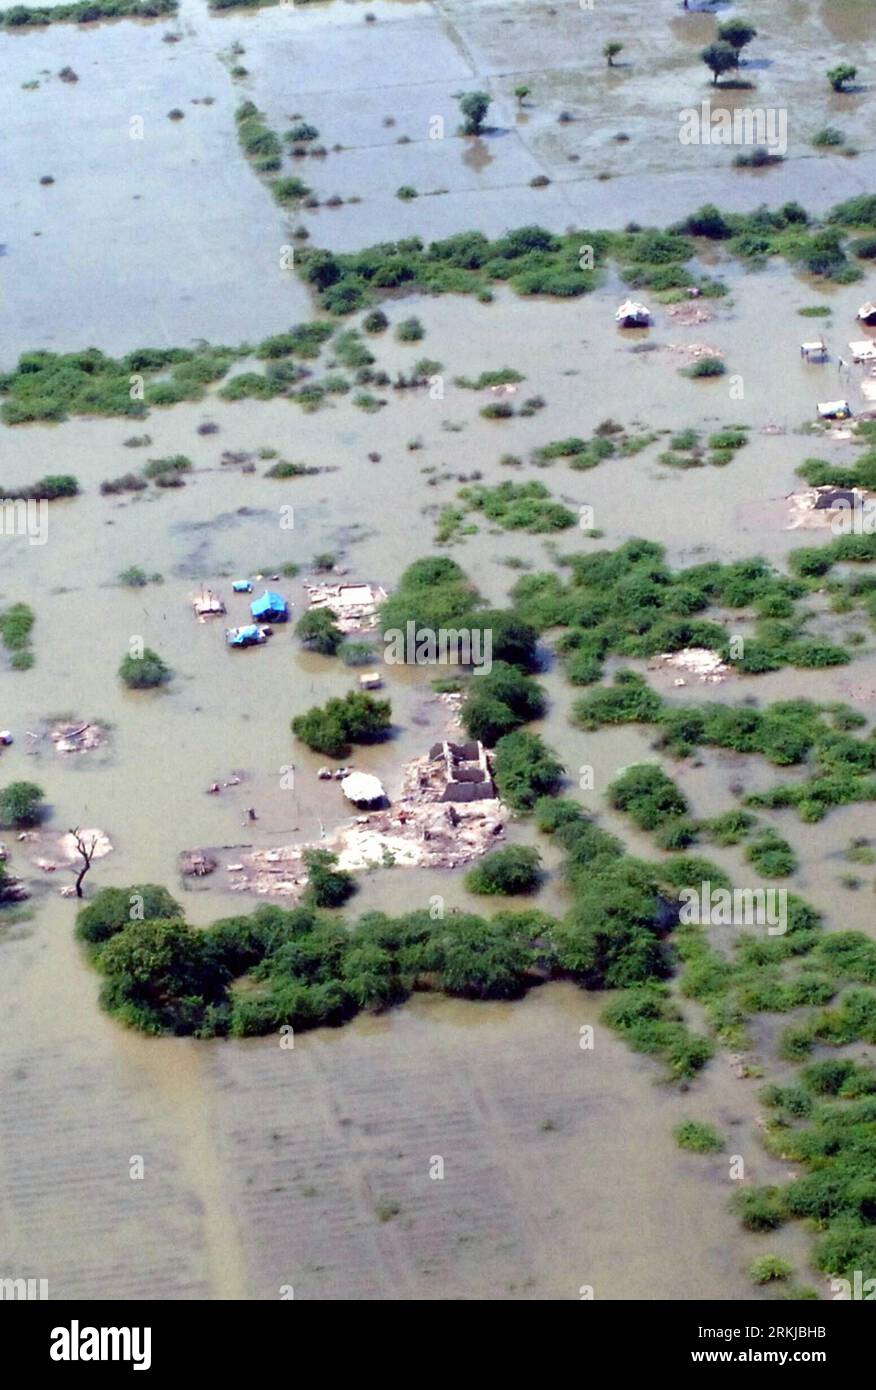 Bildnummer: 56086786  Datum: 23.09.2011  Copyright: imago/Xinhua (110924) -- SANGHAR(PAKISTAN), Sept. 24, 2011 (Xinhua) -- An aerial view shows destroyed houses in flooded area of Sanghar district of Pakistan s Sindh province, Sept. 23, 2011. At least 369 have died and 700,000 are living in refugee camps because of floods in southern Pakistan, the country s national disaster authority said. (Xinhua/Ahmad Kamal) PAKISTAN-SANGHAR-FLOODS PUBLICATIONxNOTxINxCHN Gesellschaft Naturkatastrophe Hochwasser Luftbild Vogelperspektive Perspektive Totale xda x0x premiumd 2011 hoch      56086786 Date 23 09 Stock Photo